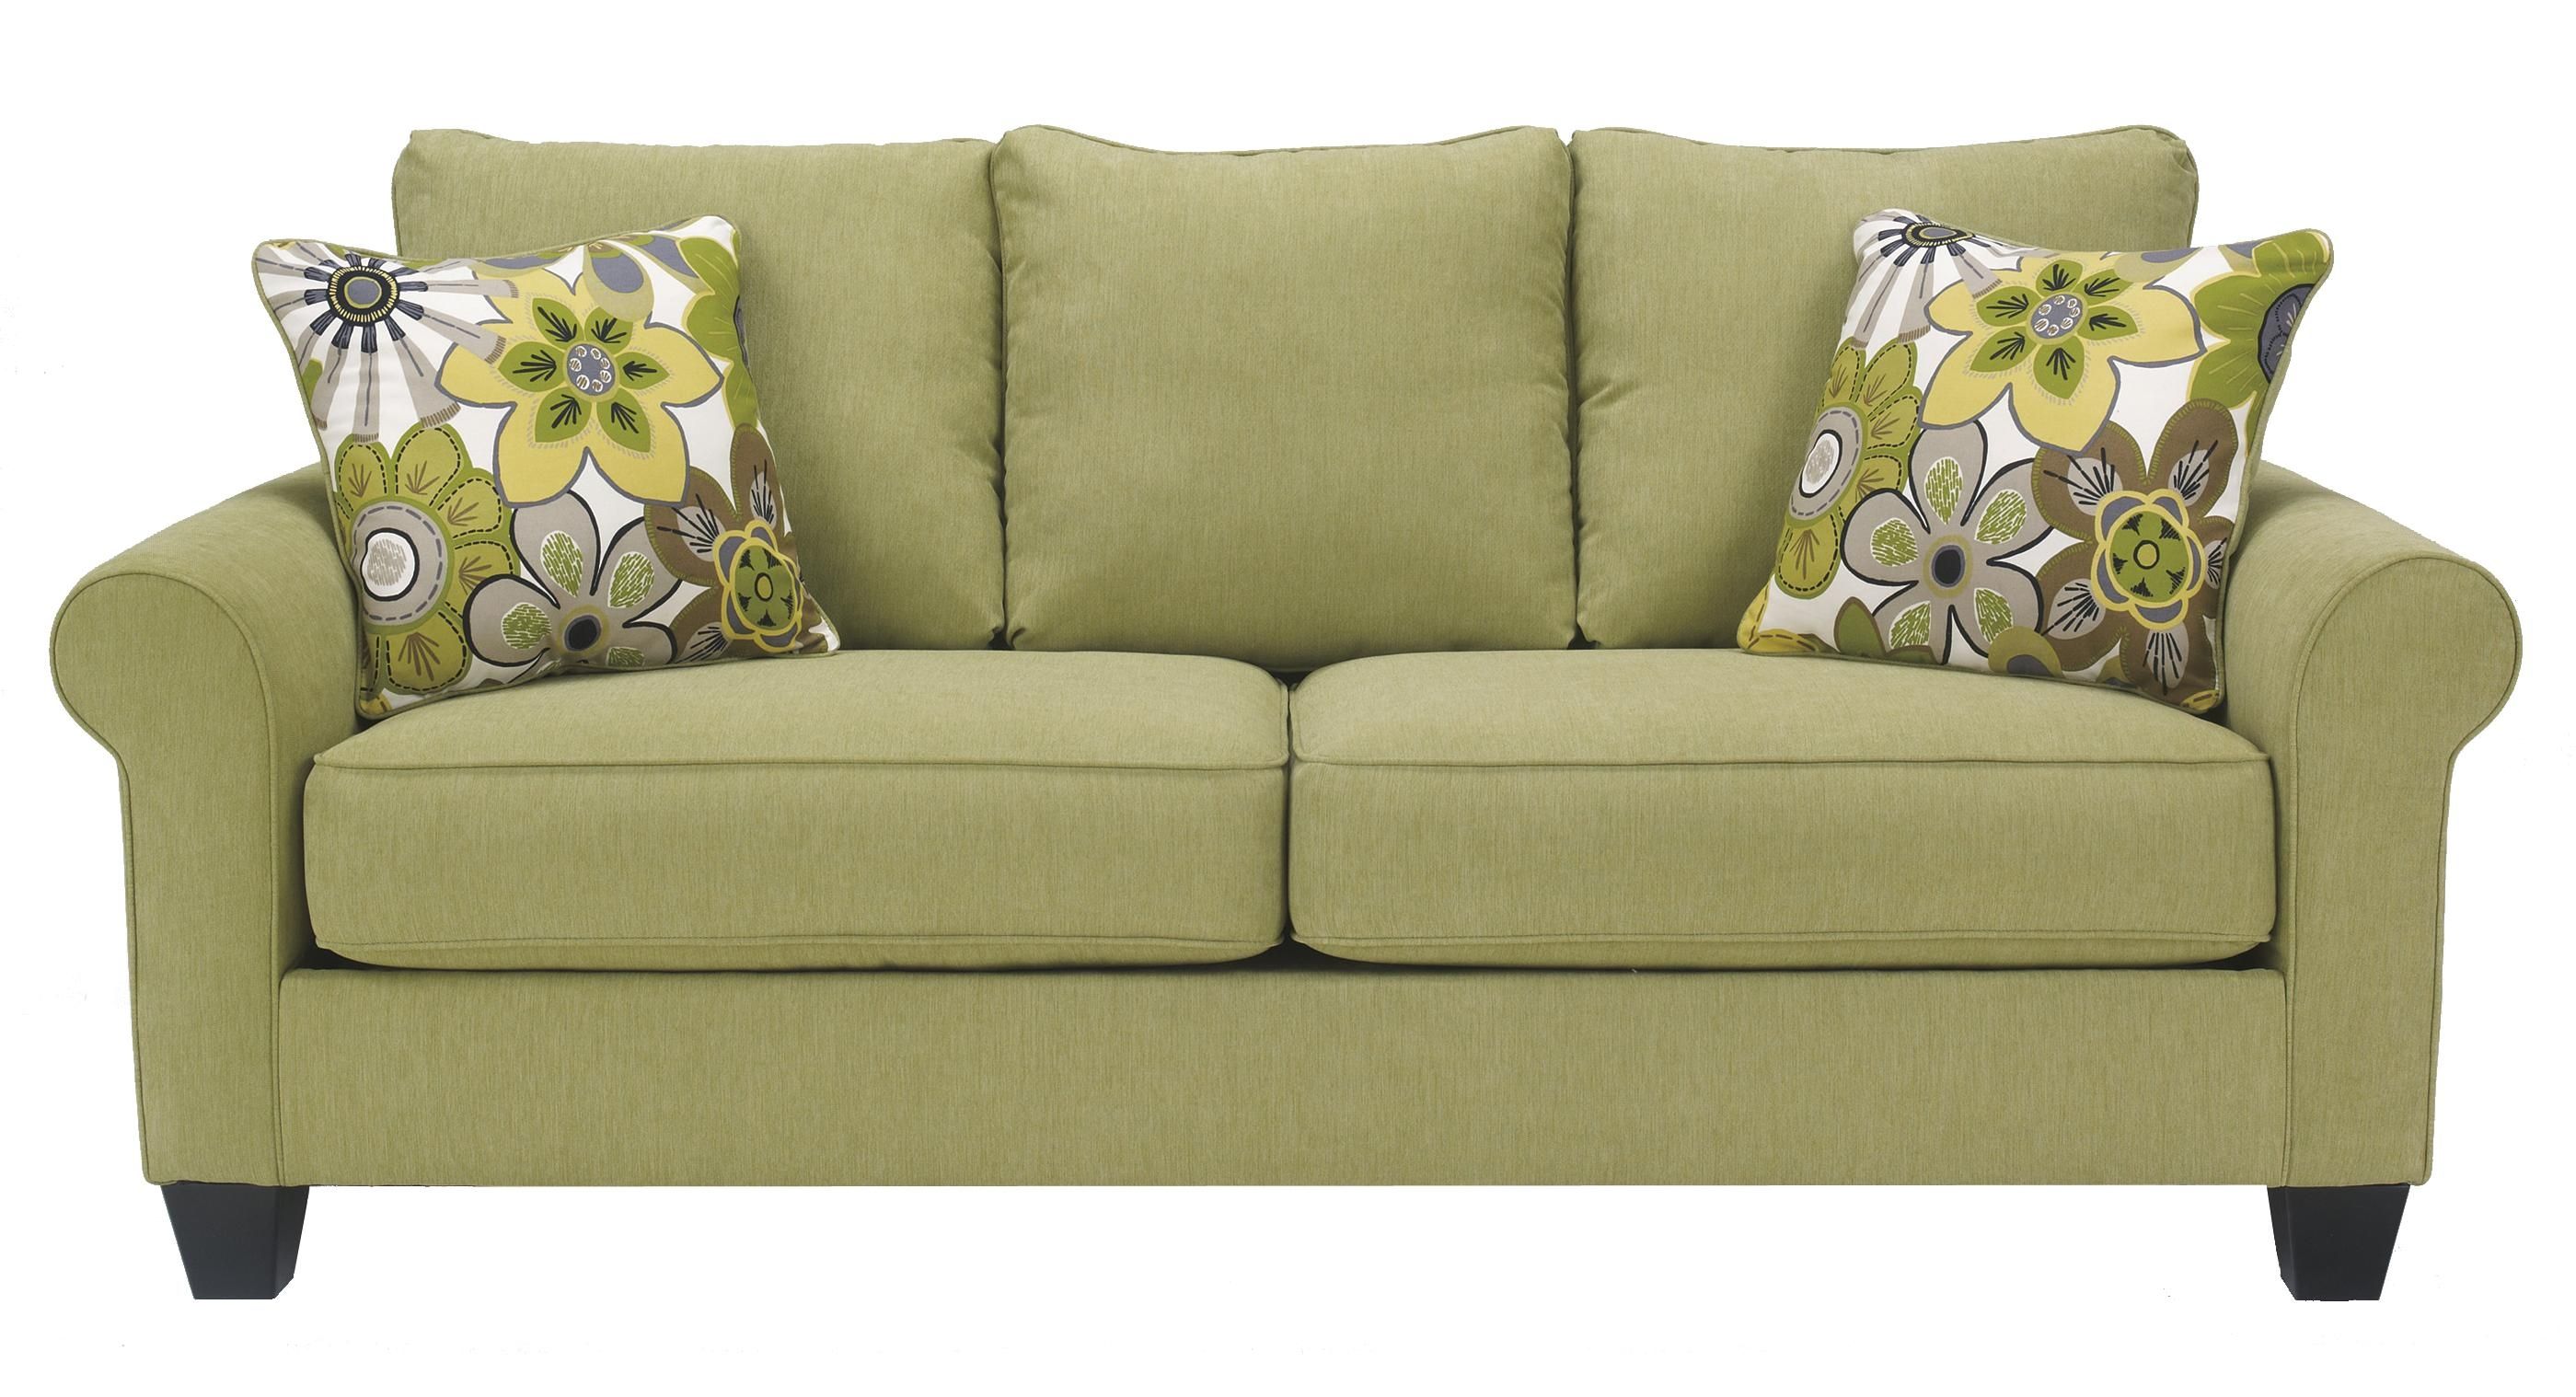 Decor Fascinating Benchcraft Sofa With Luxury Shapes For Living Within Berkline Sofa Recliner (View 11 of 15)